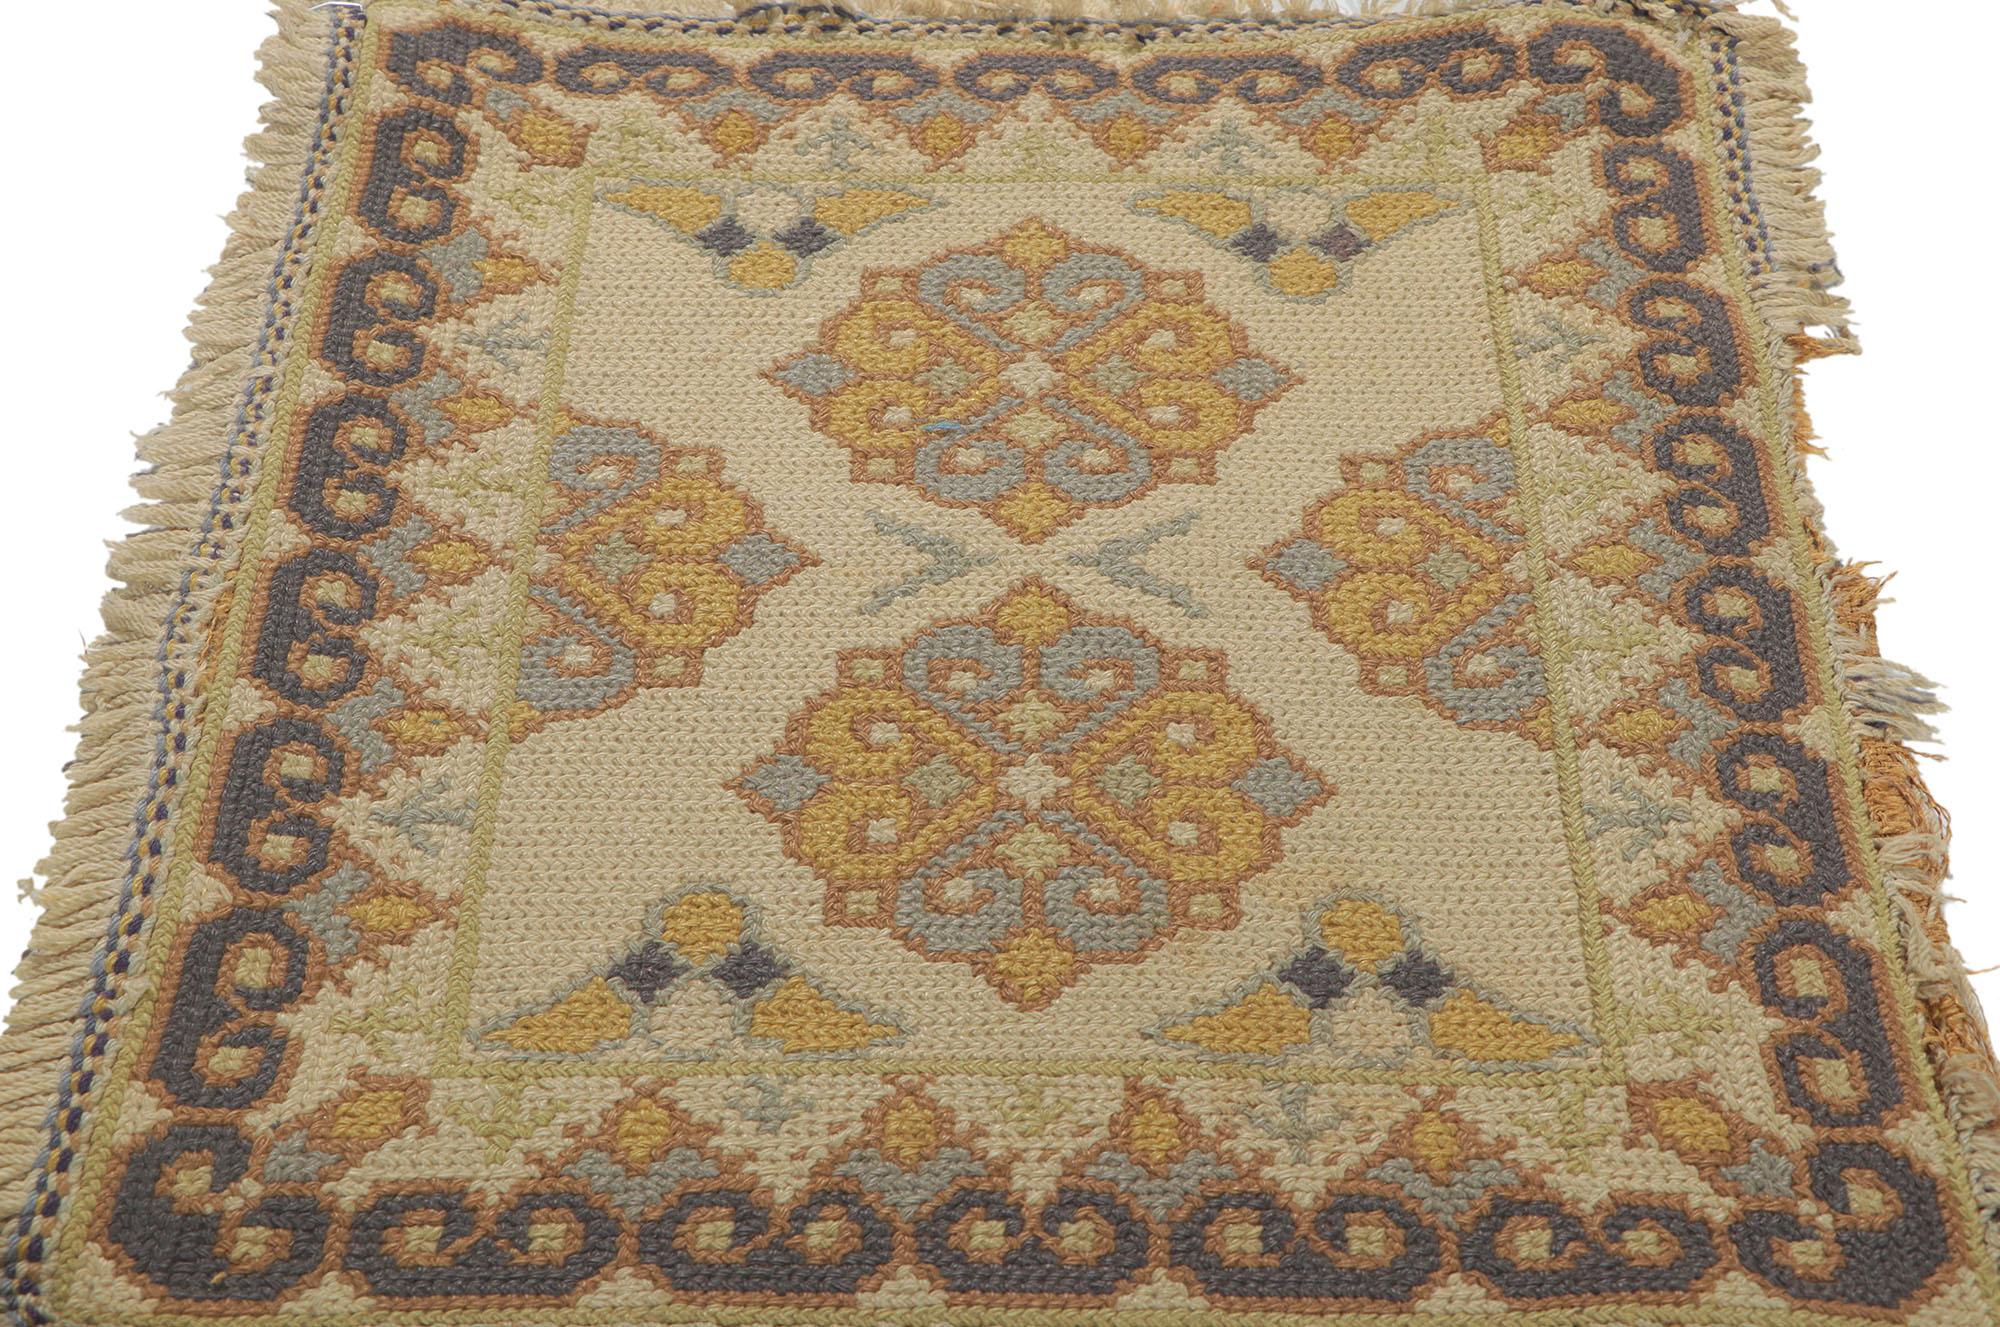 Antique Portuguese Arraiolos Needlepoint Rug In Distressed Condition For Sale In Dallas, TX